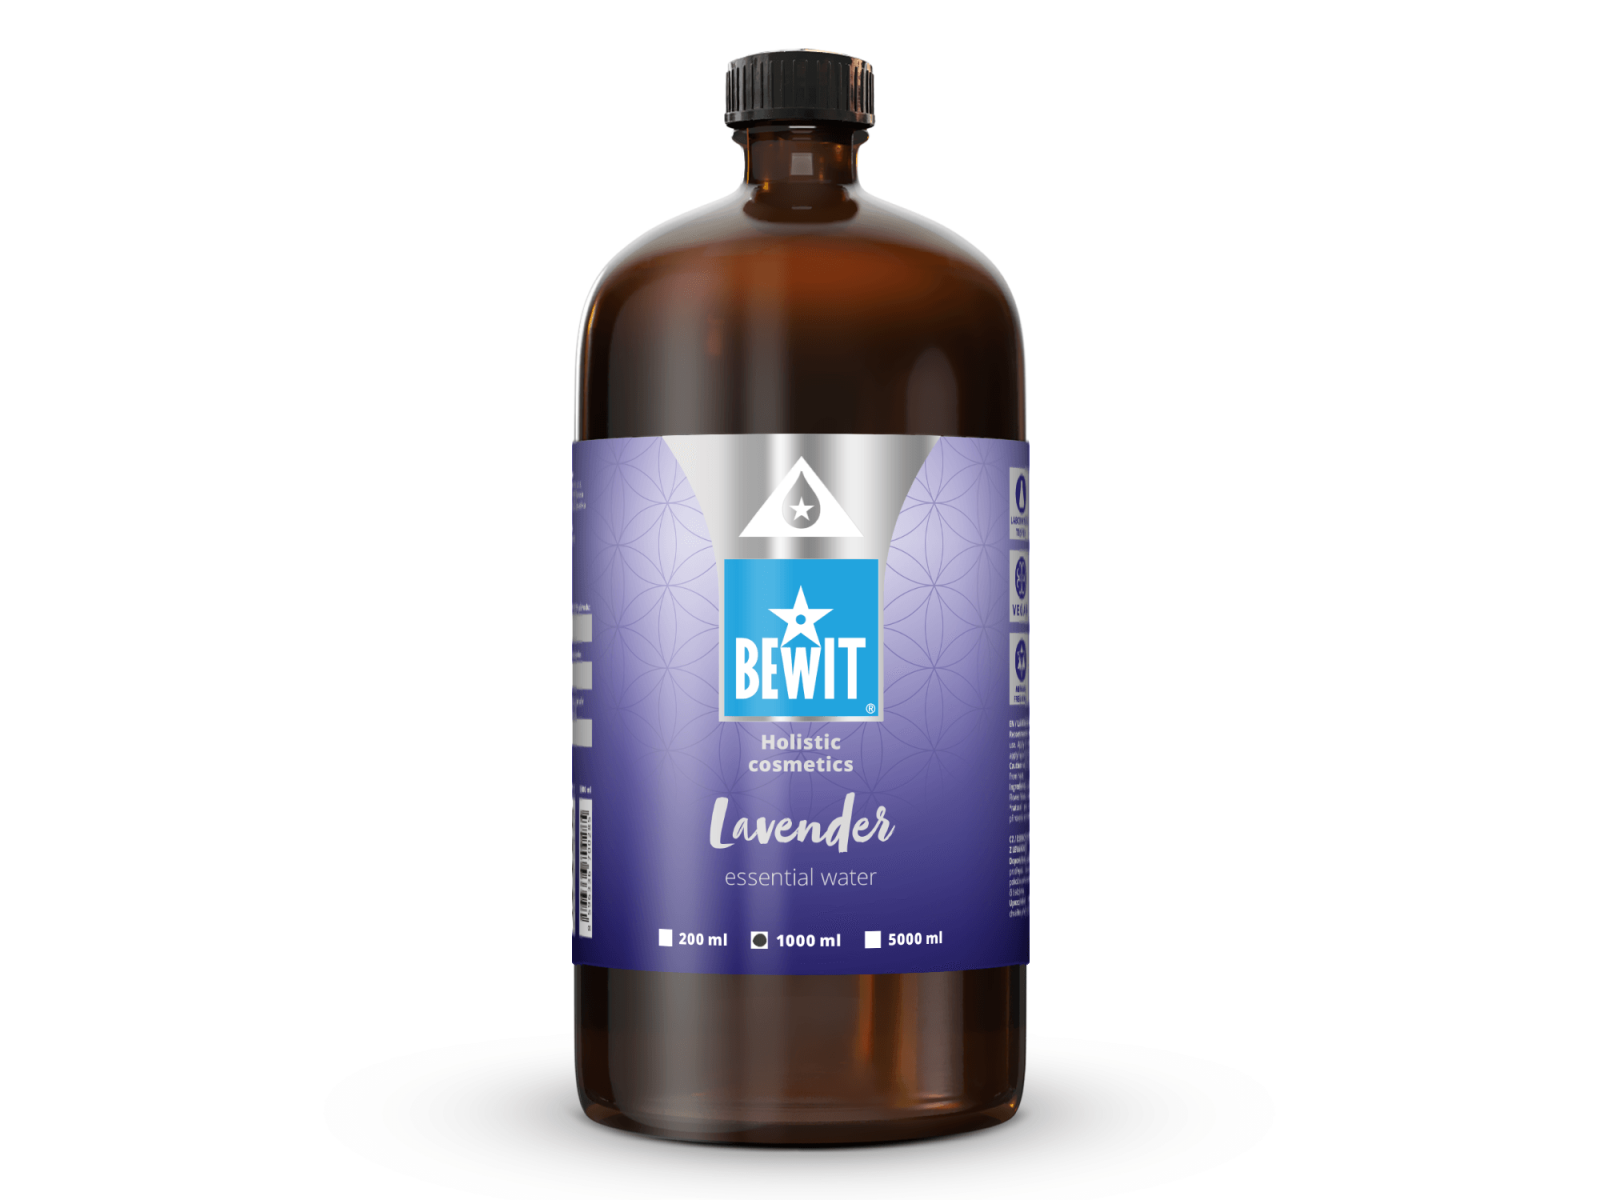 Lavender essential water - 100% NATURAL HYDROLYTE - 4